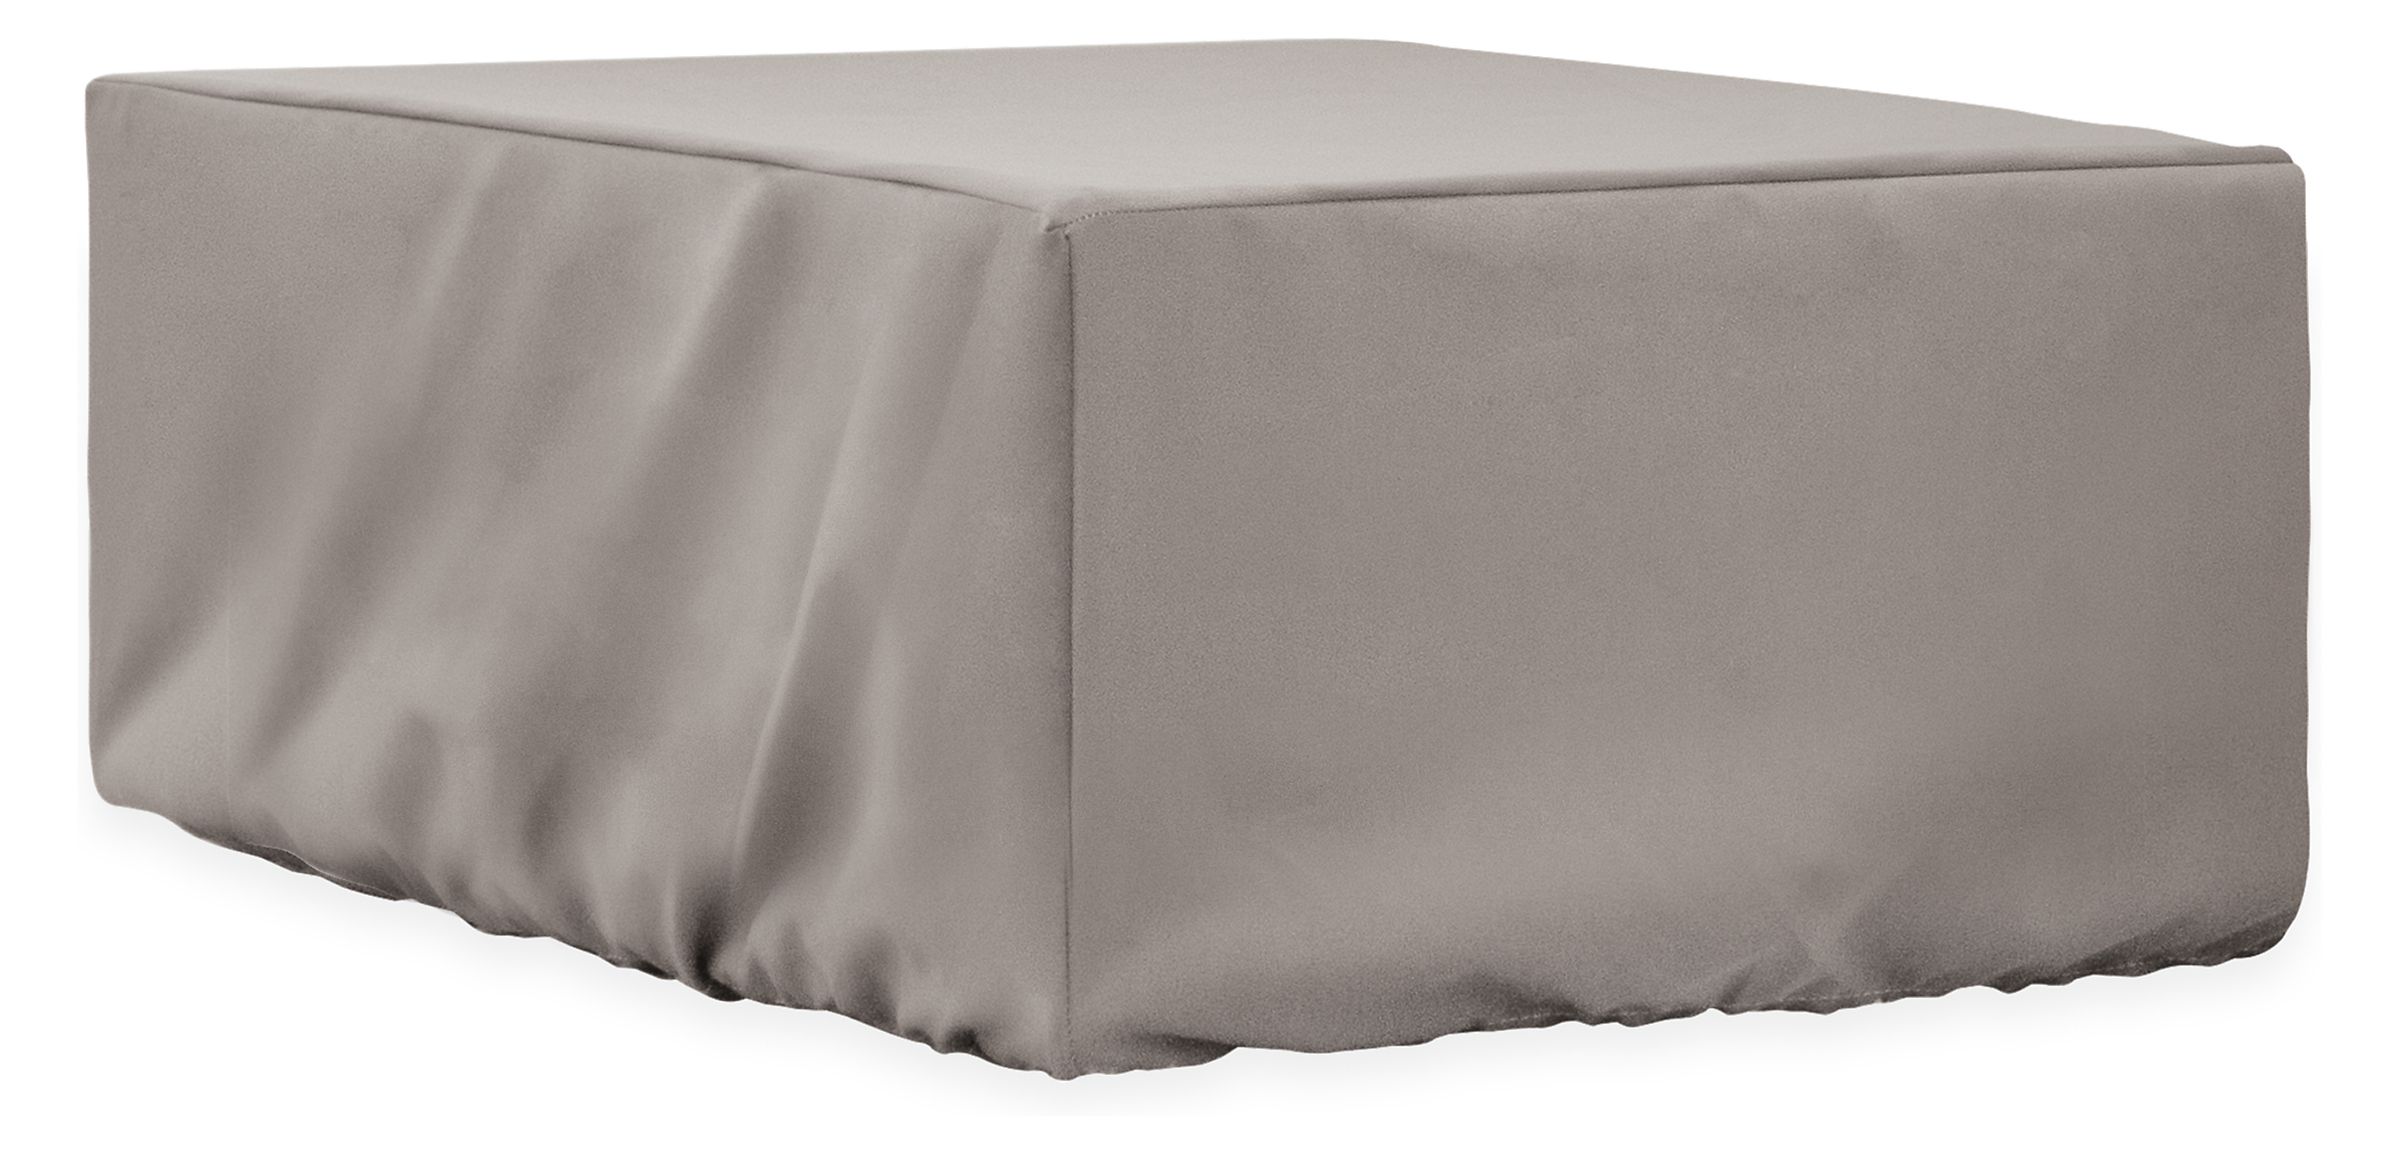 Outdoor Cover for Table 43w 43d 14h with Drawstring